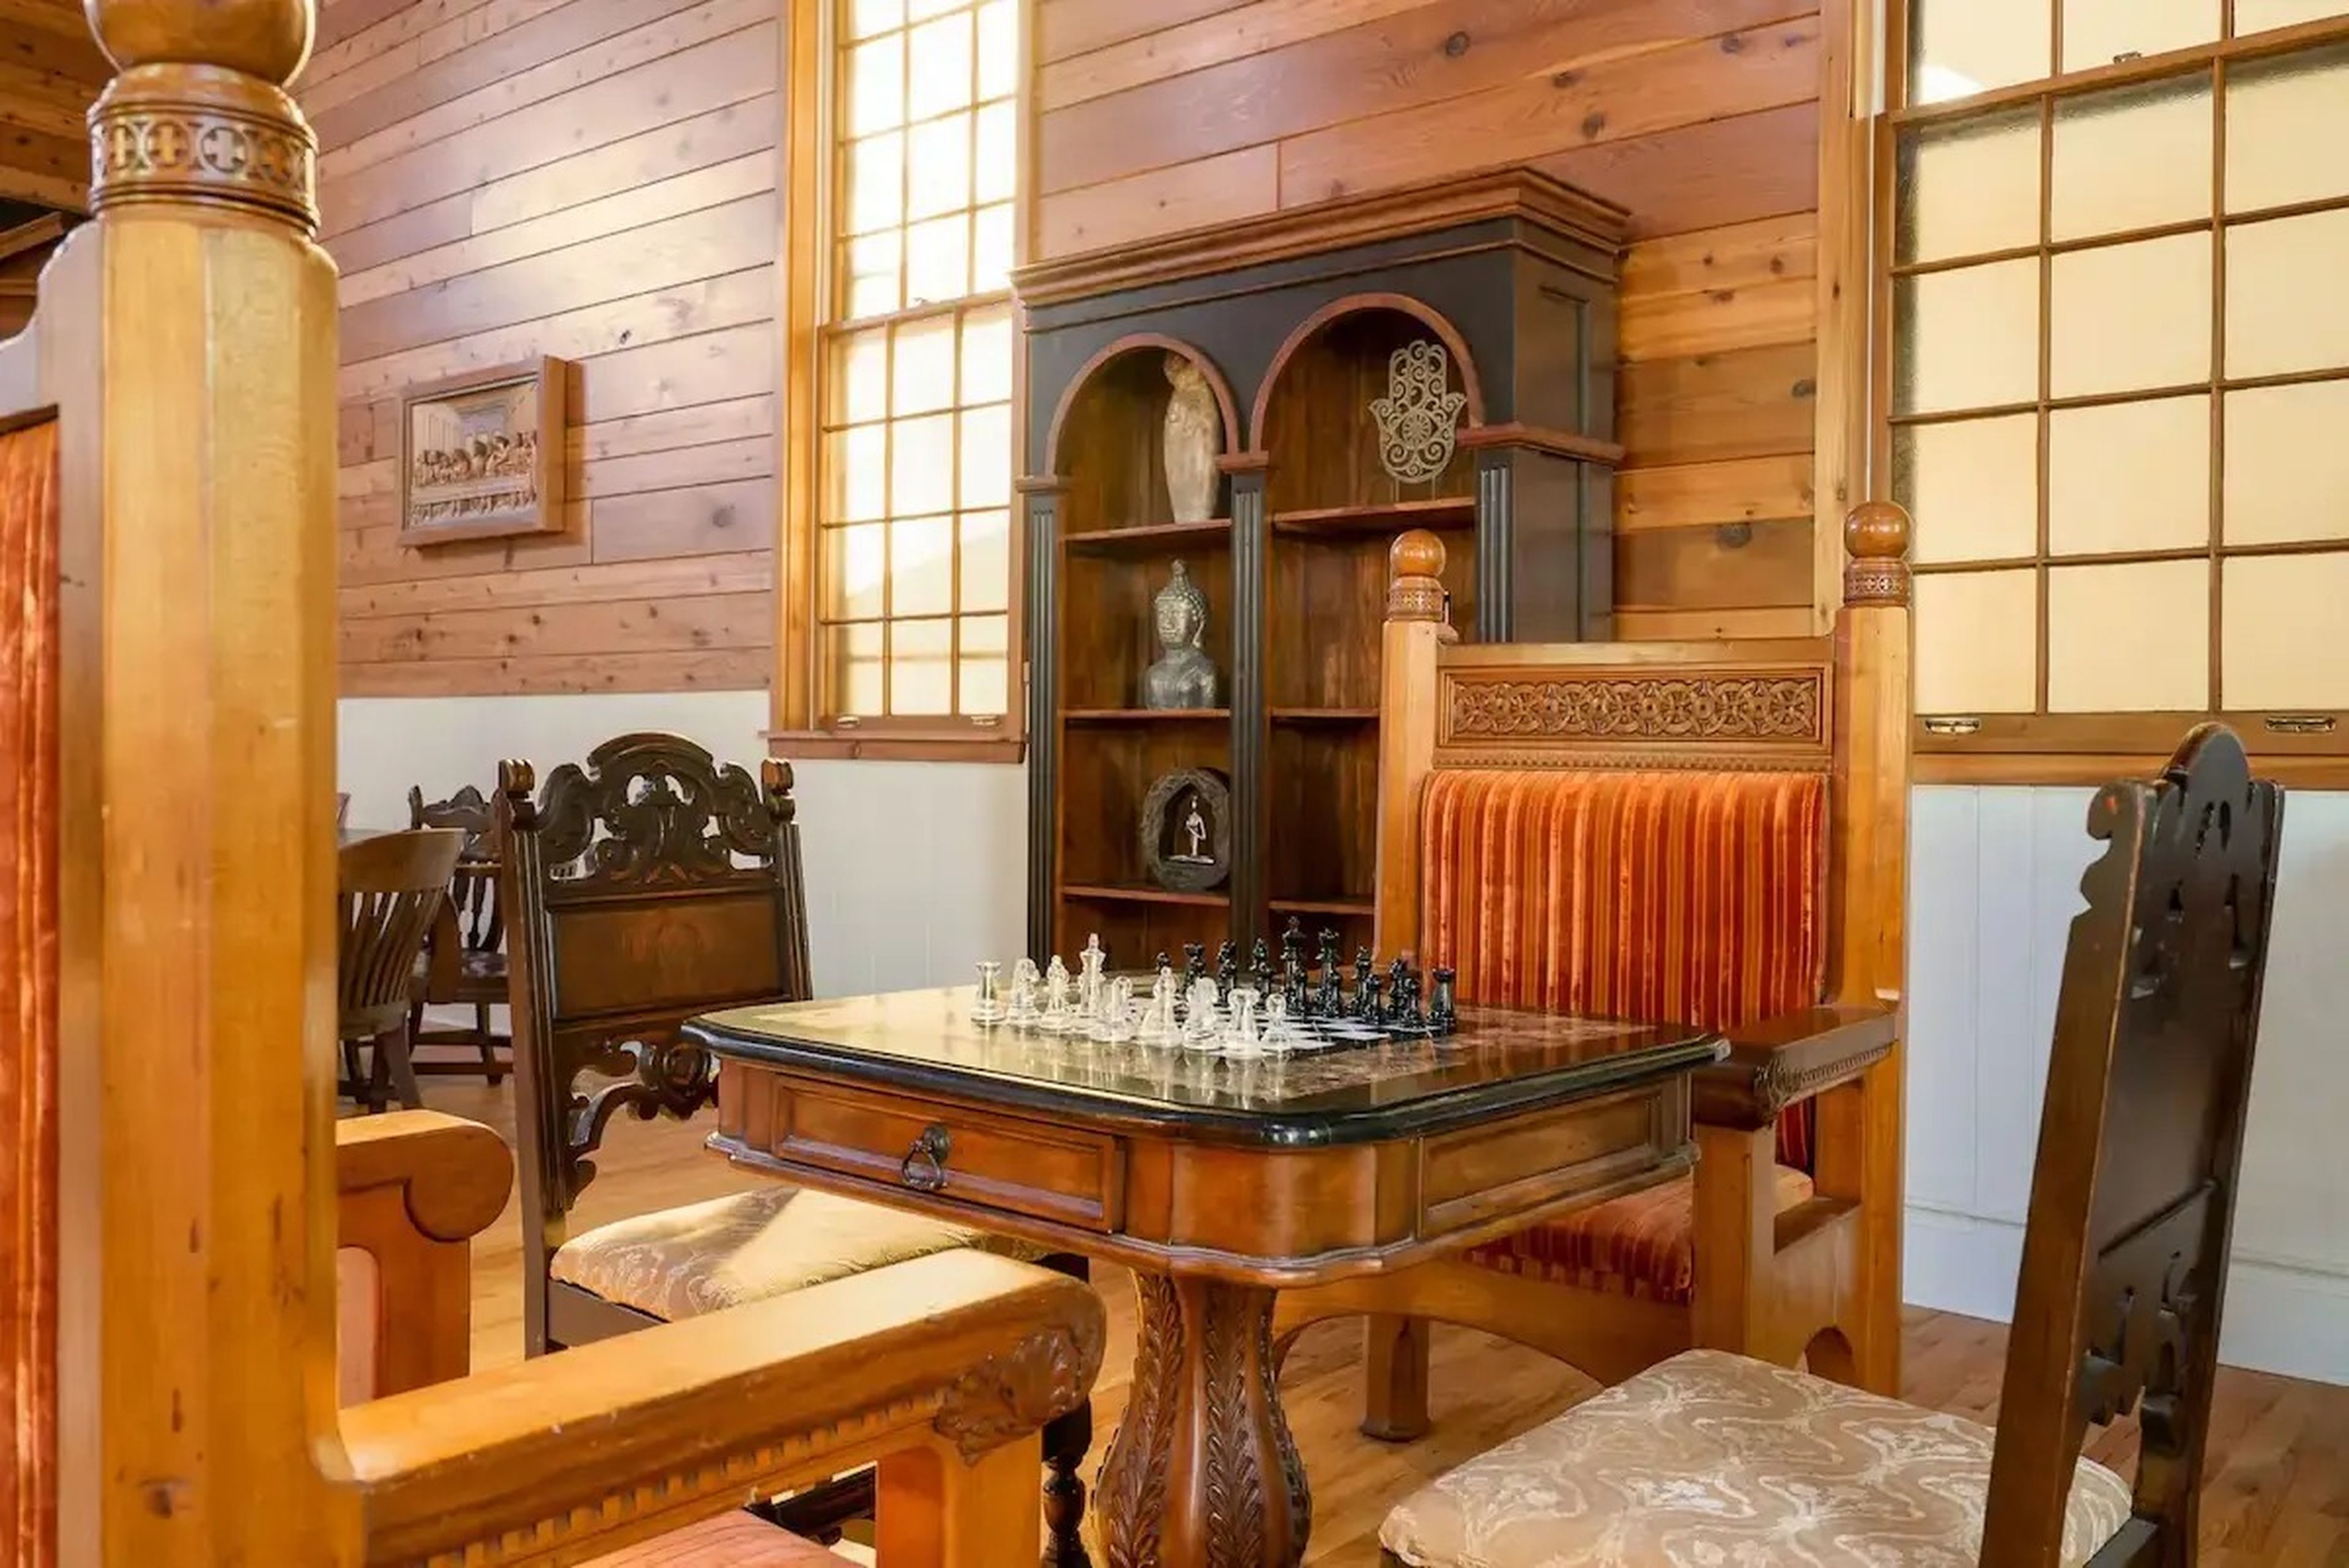 A room with wood walls and a chess table surrounded by intricate wood chairs.